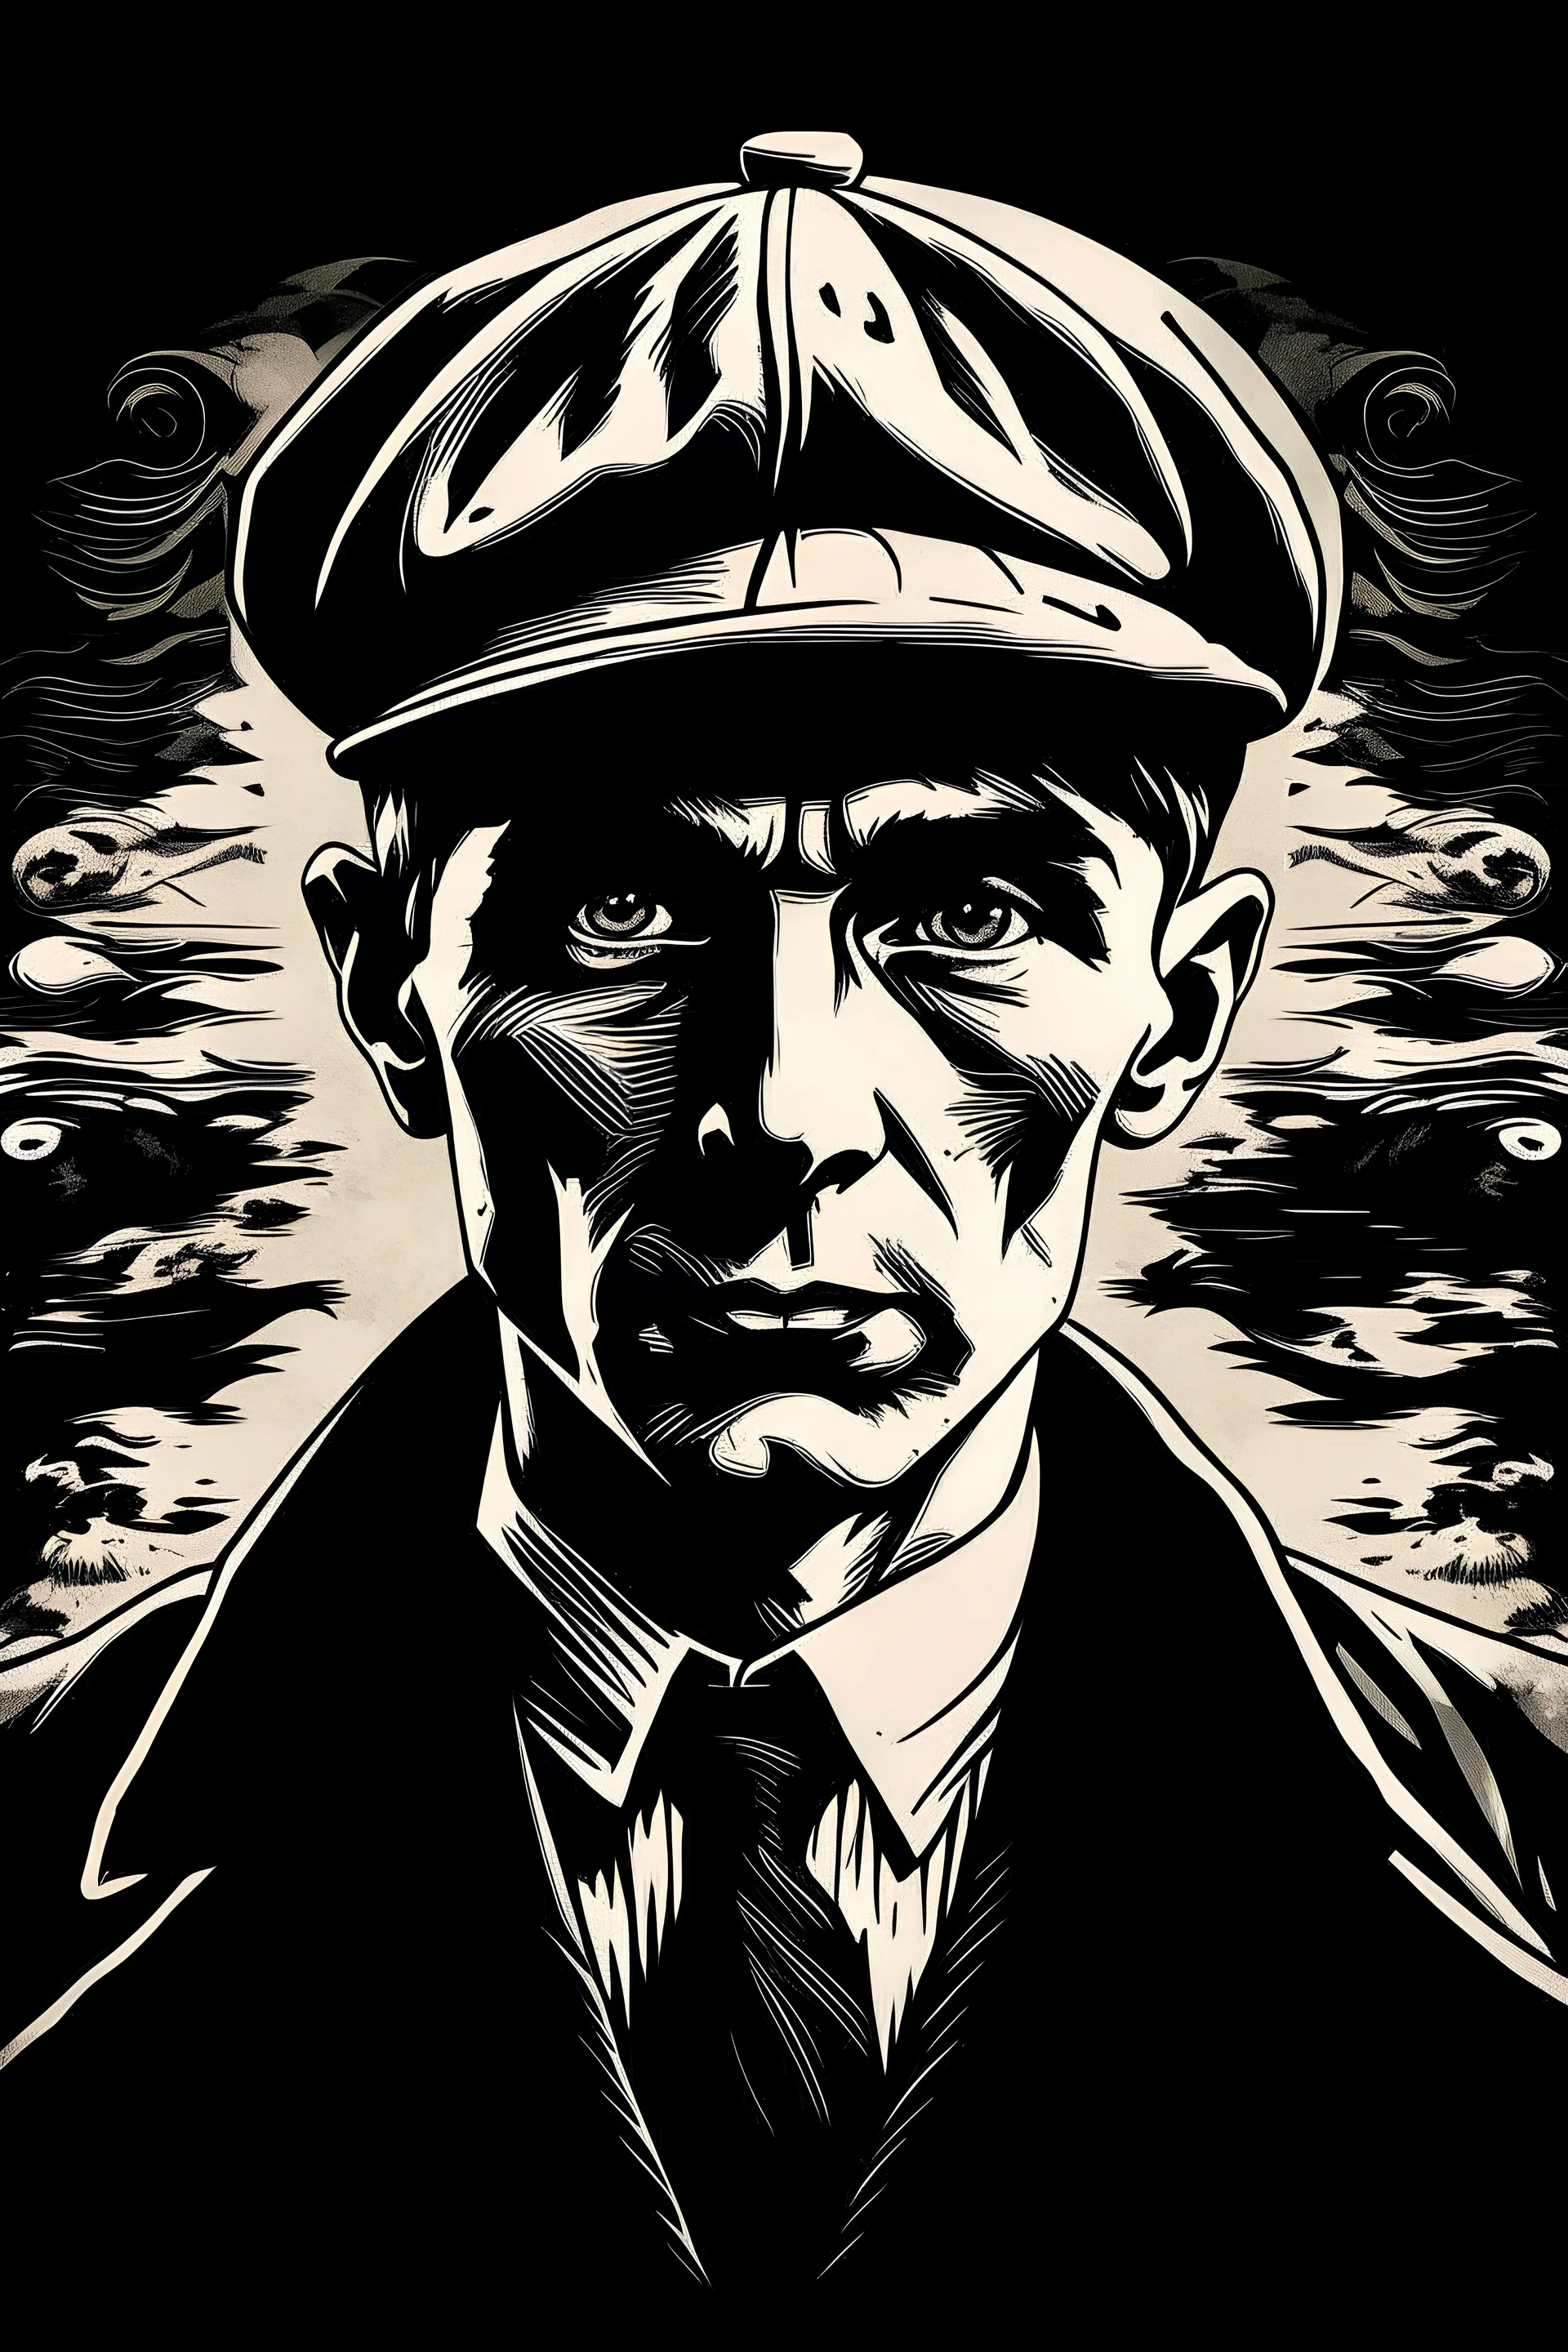 Peaky Blinder as from the TV series Peaky Blinders, graphic illustration